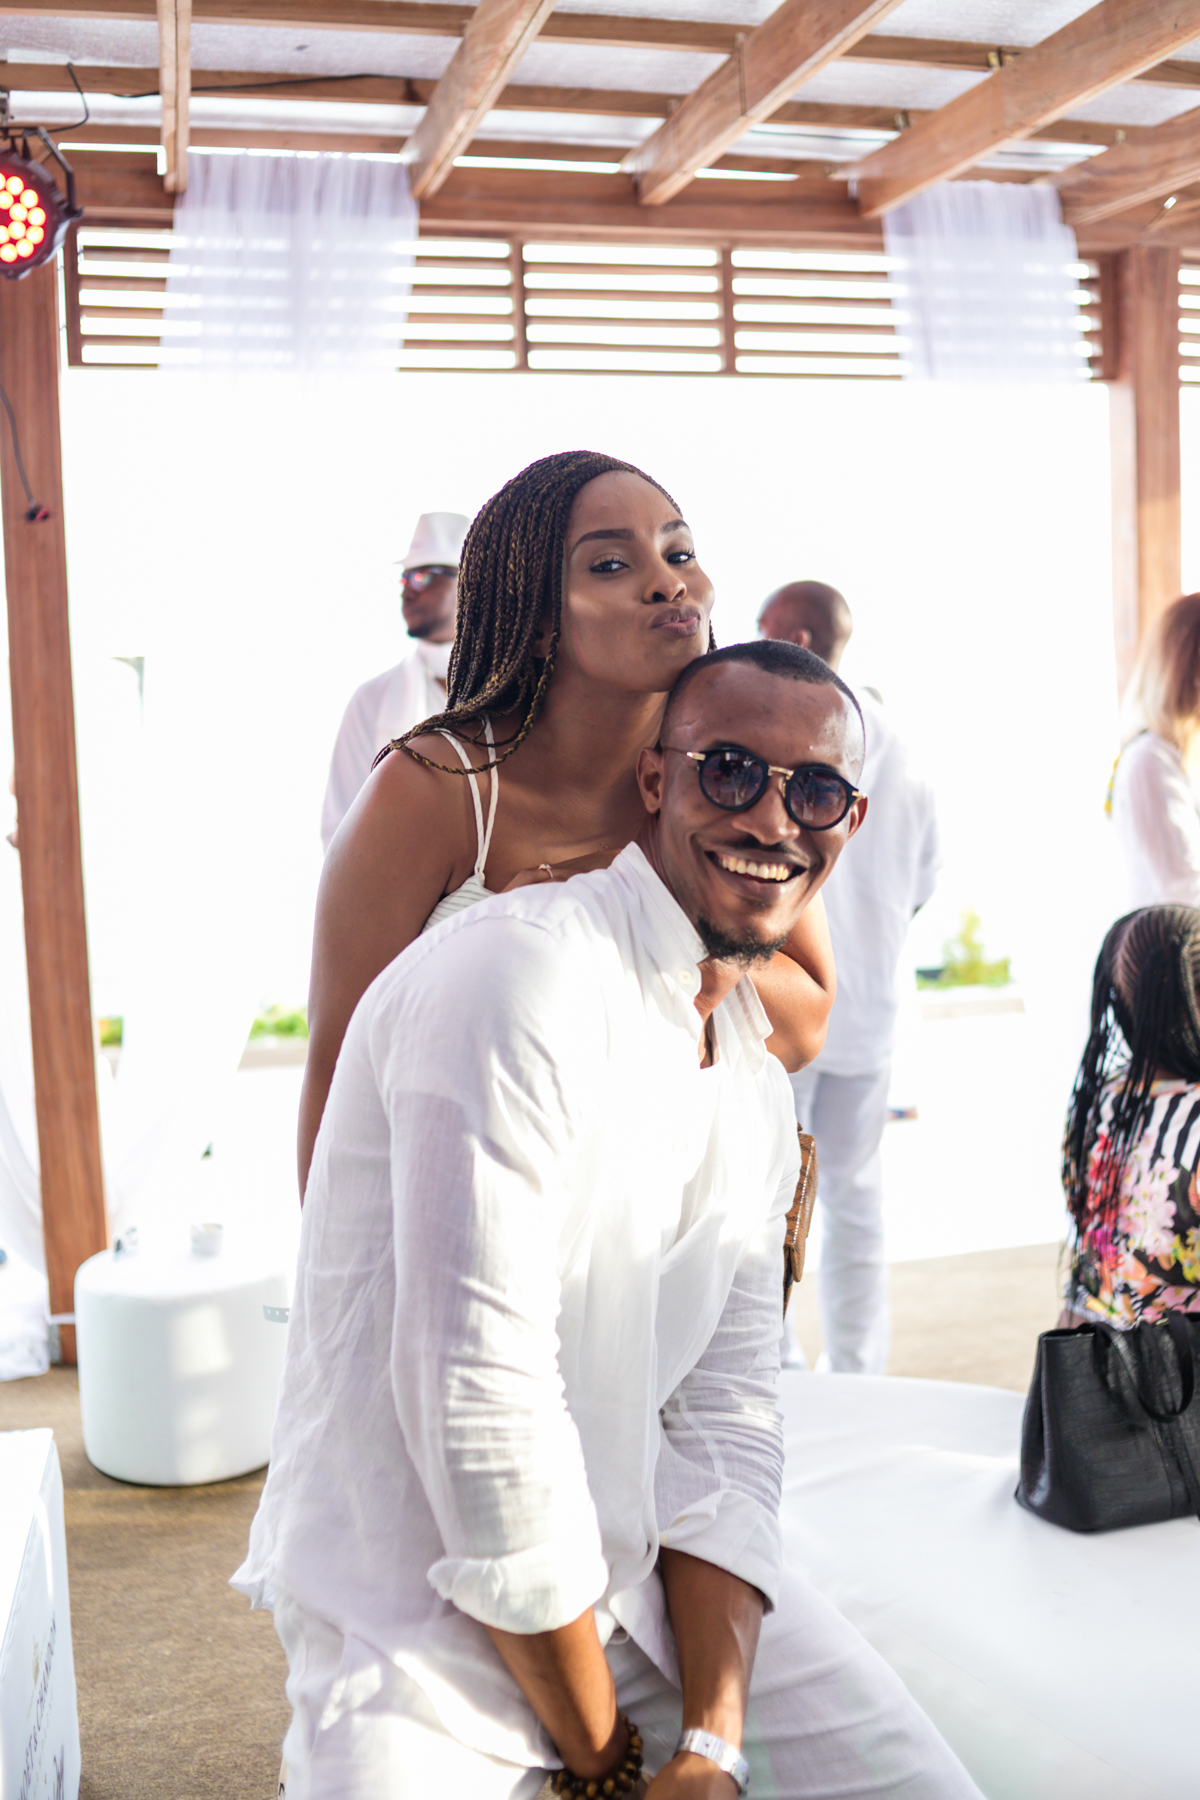 Inside Moët & Chandon’s Fabulous All-White Party In Lagos